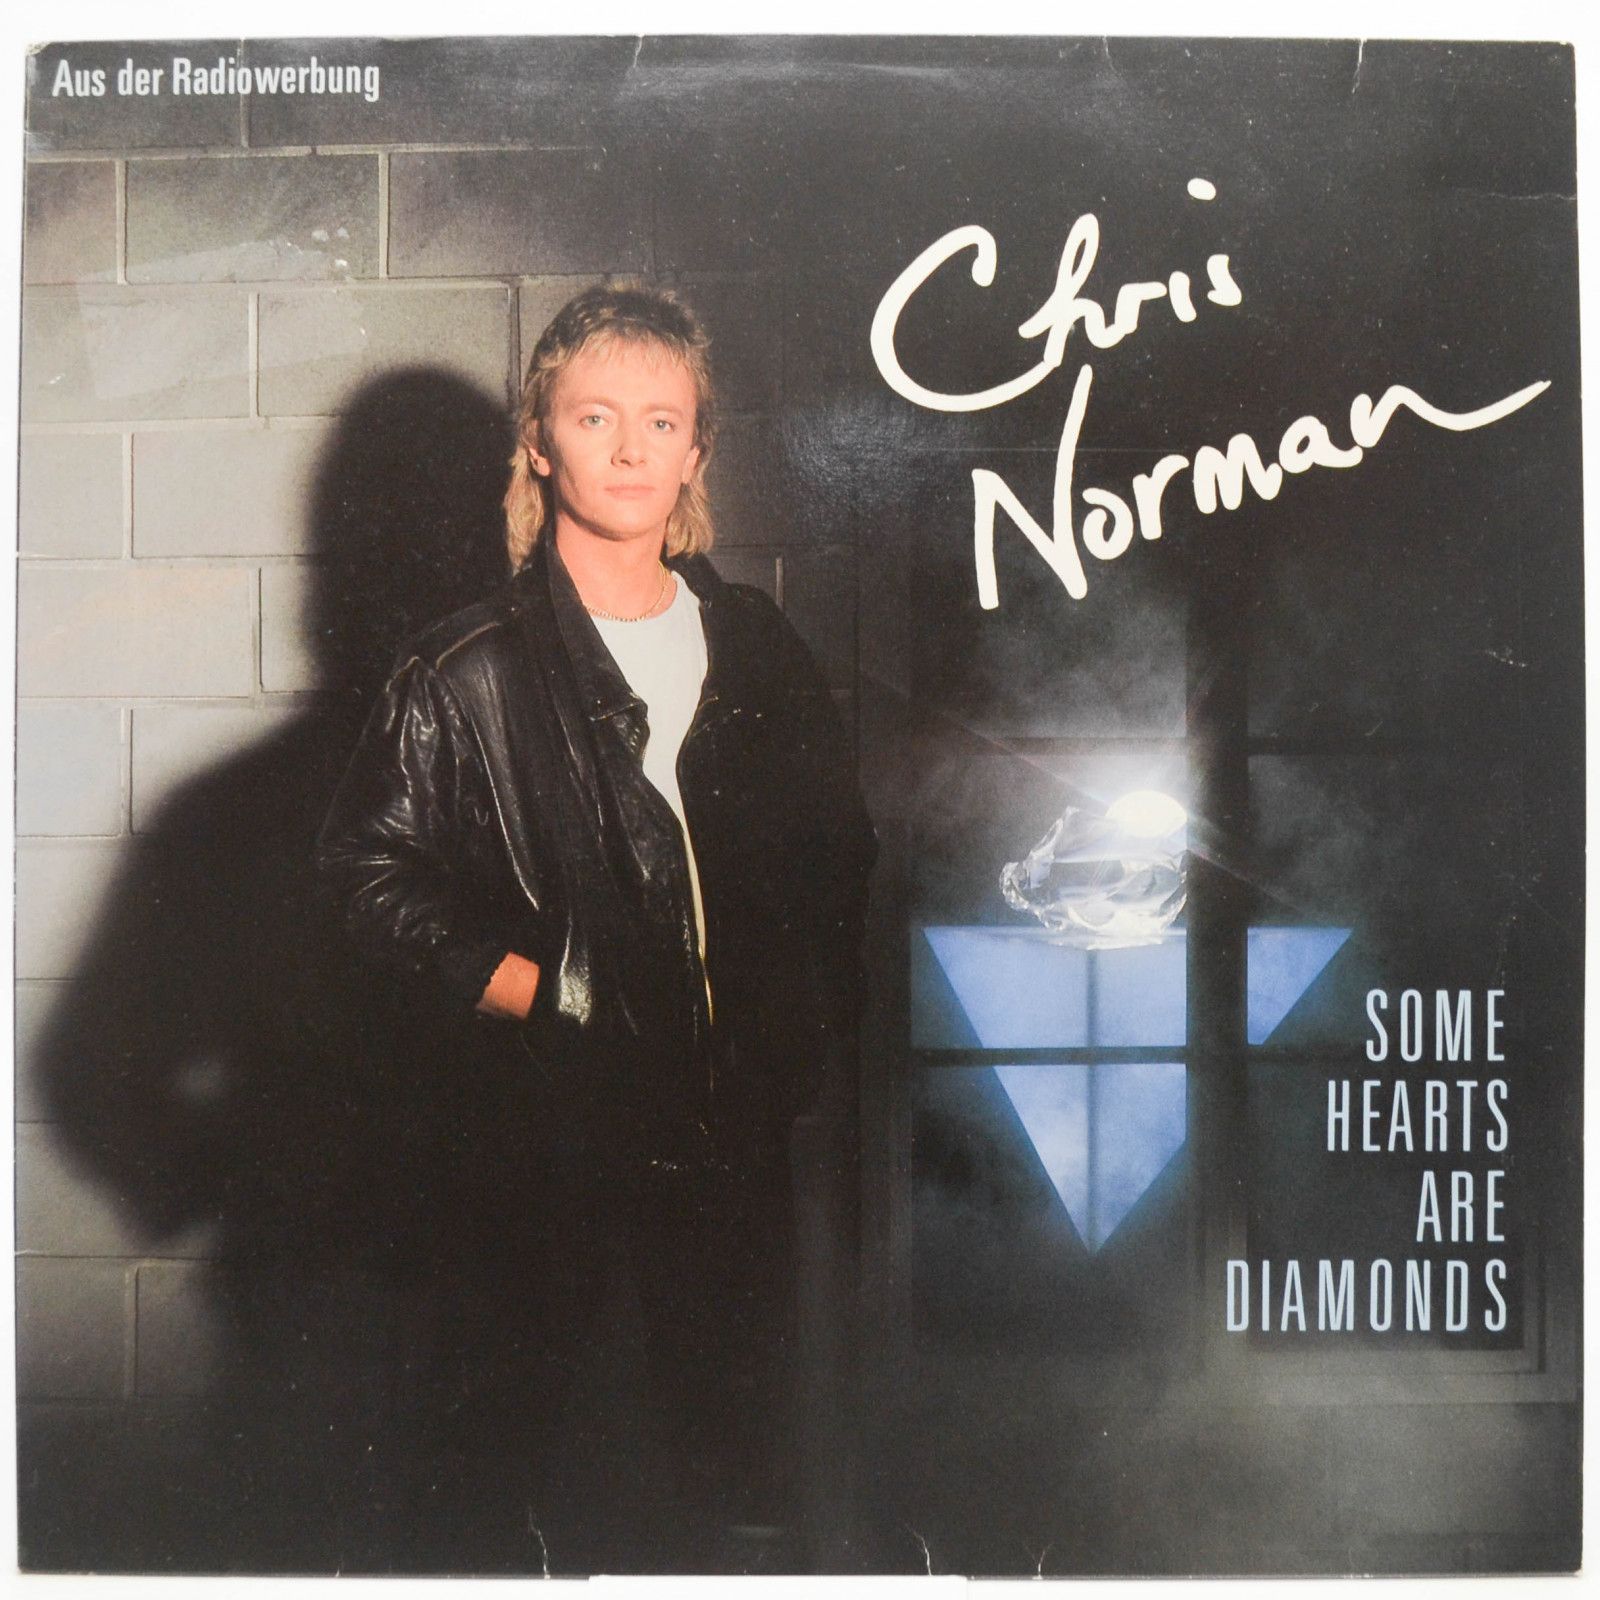 Chris Norman — Some Hearts Are Diamonds, 1986